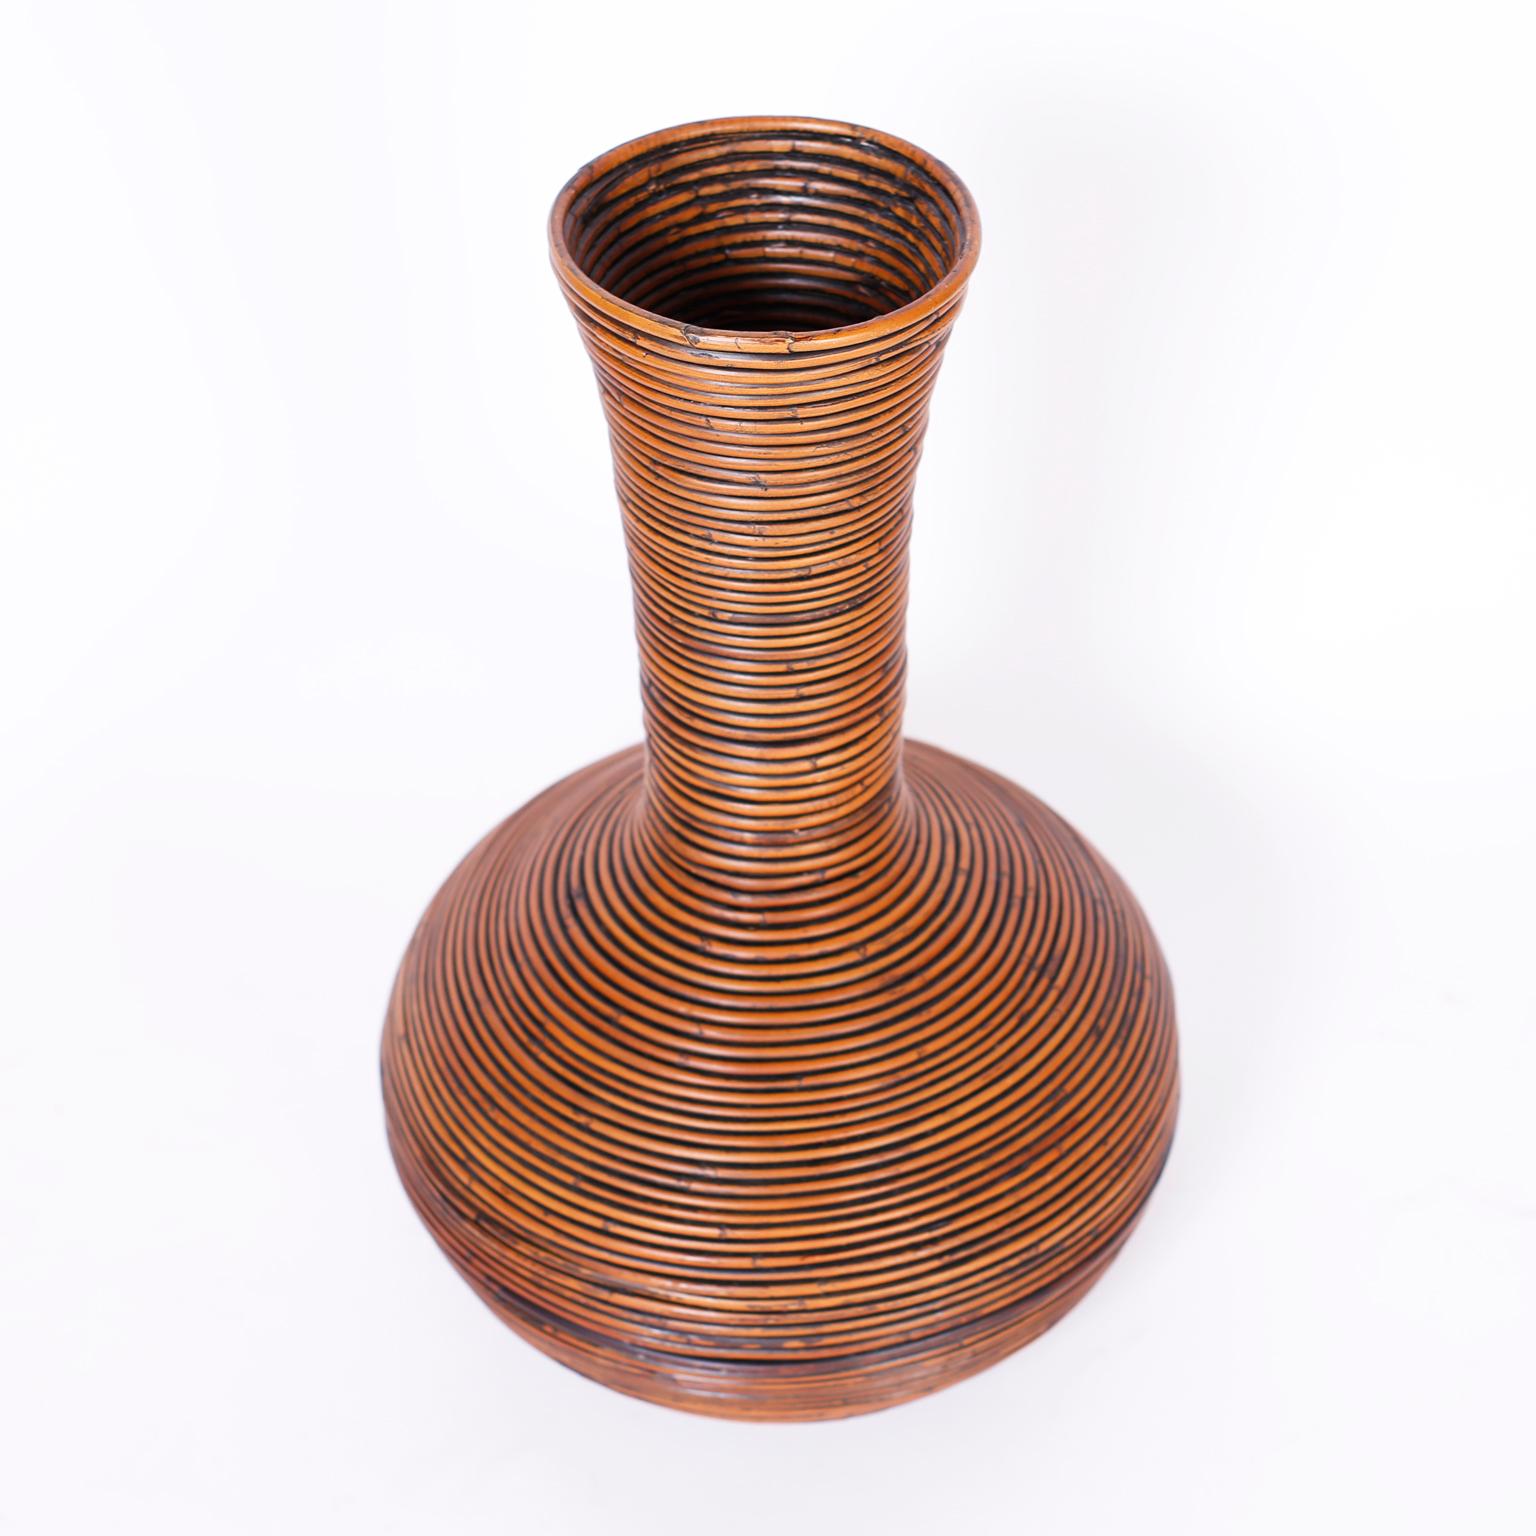 Mid century faux vase crafted with pencil reed in an ingenious bending technique in a classic modern form.